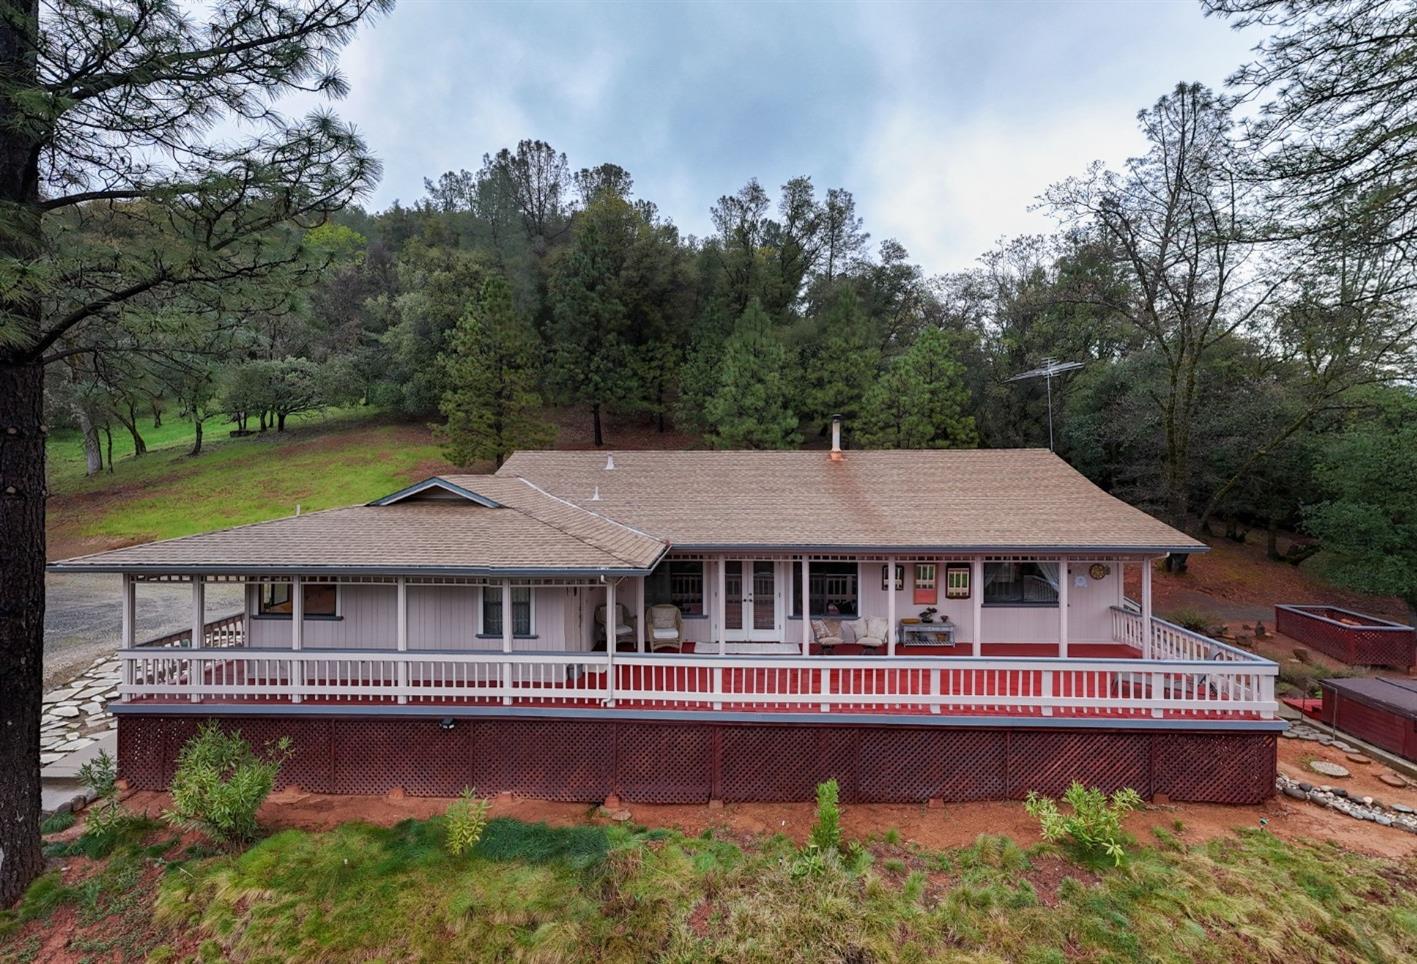 Photo of 18854 Wolf Creek Rd in Grass Valley, CA